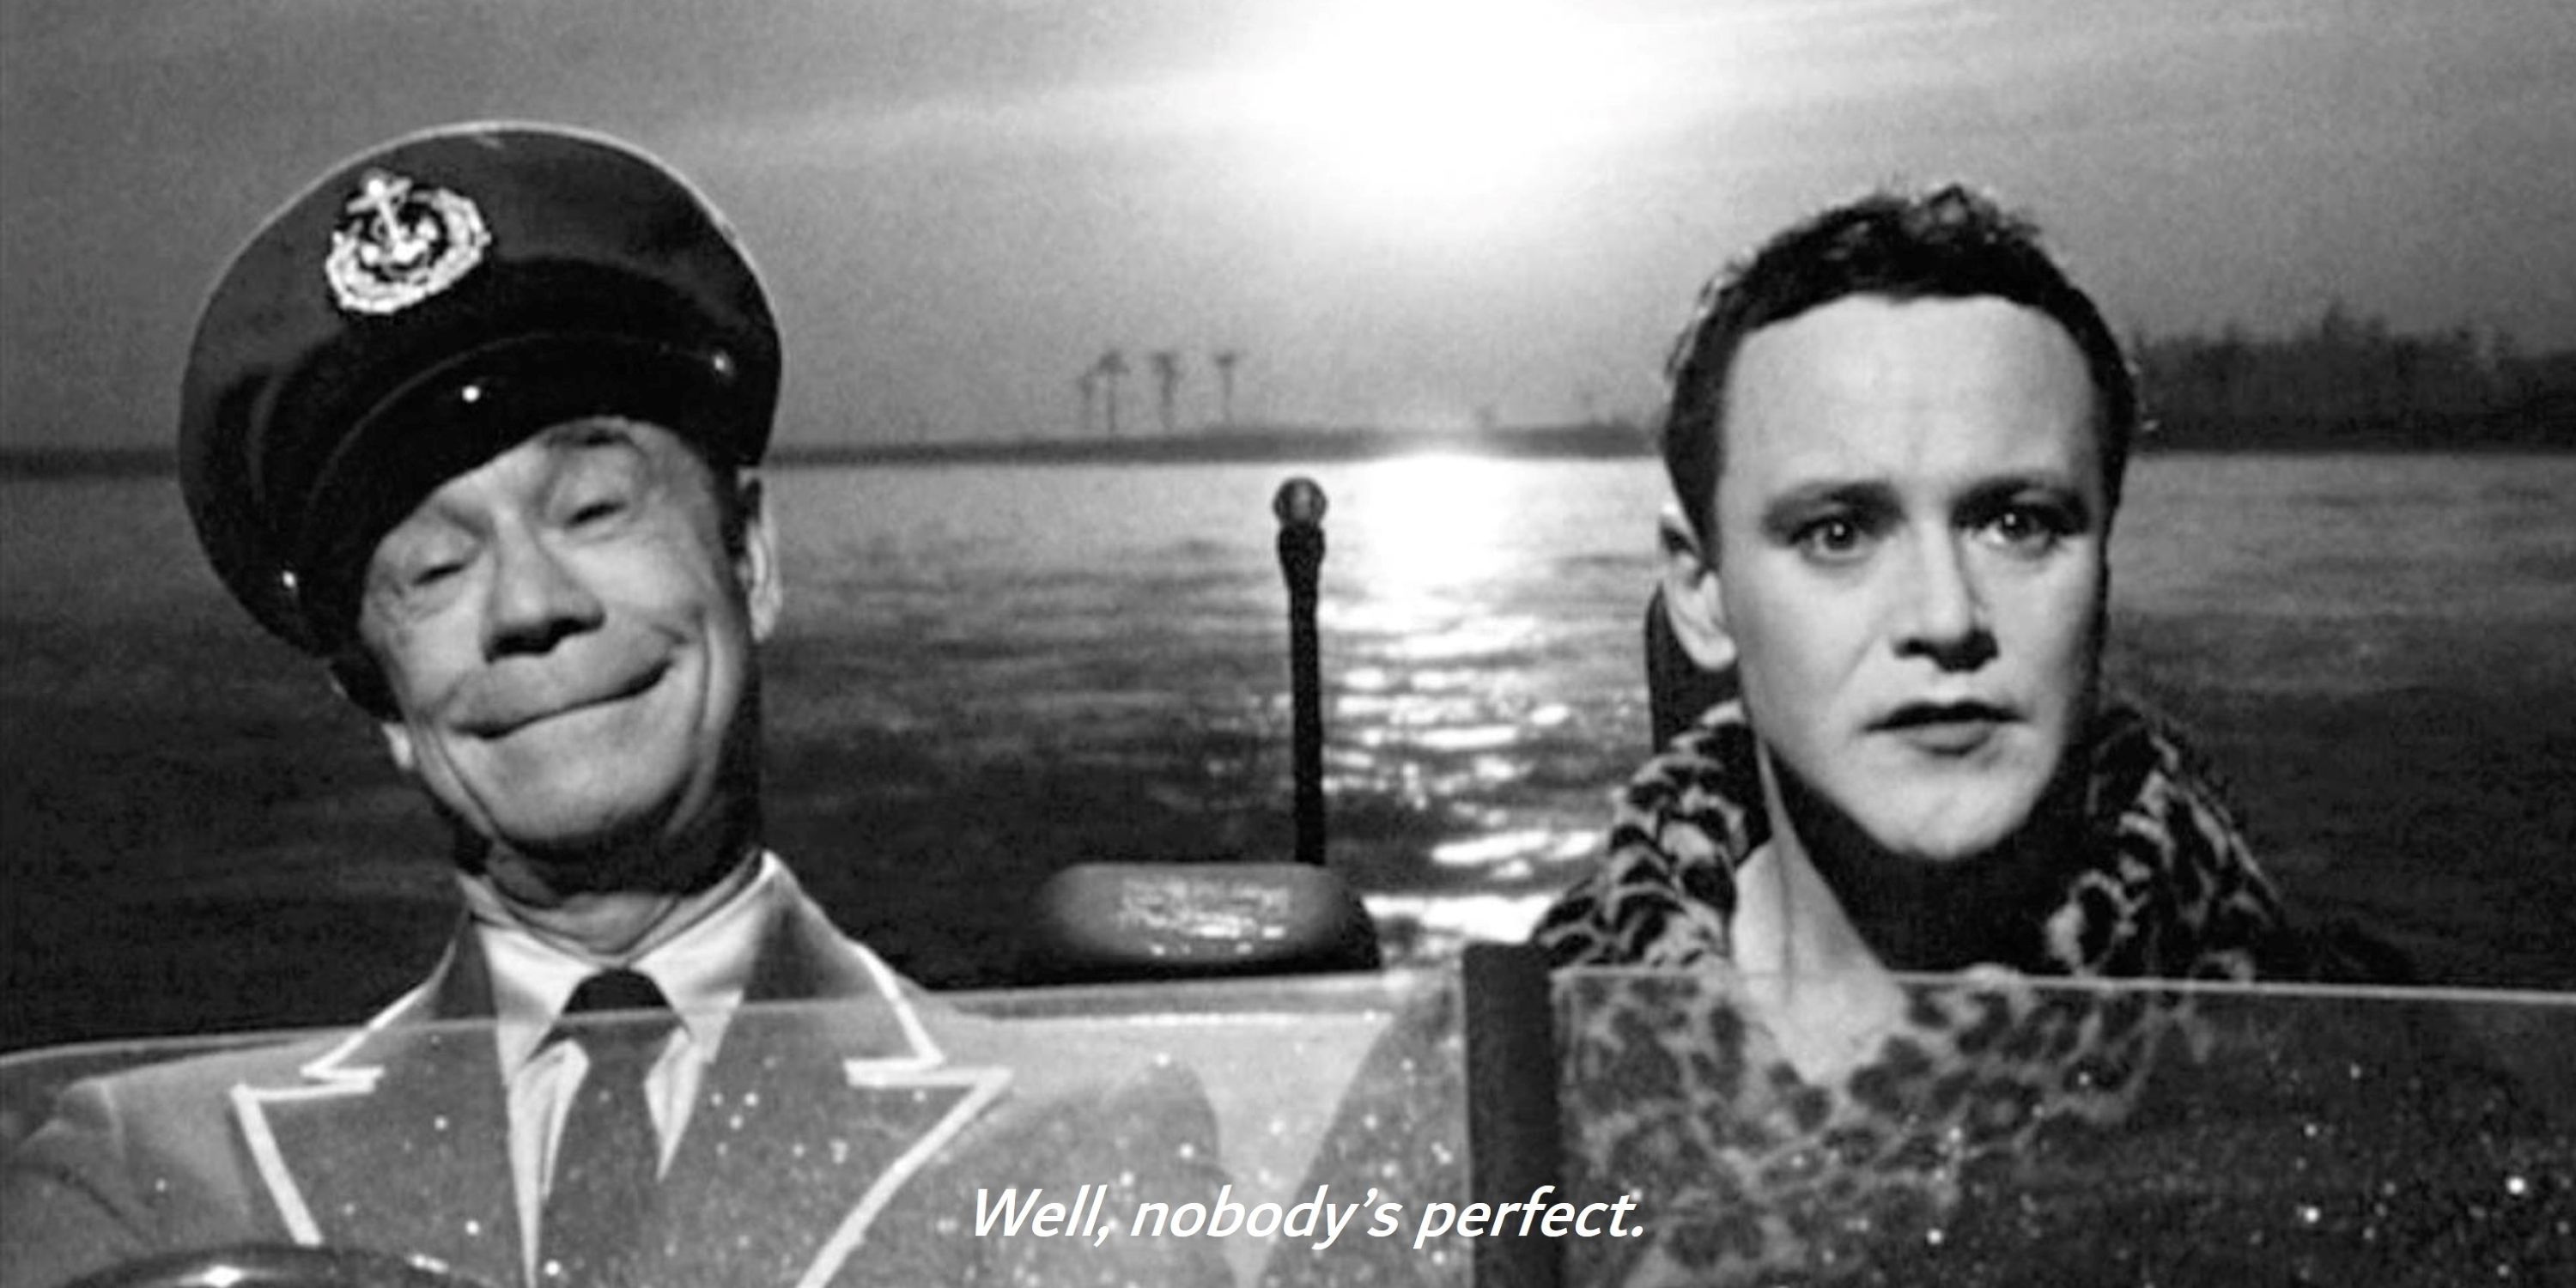 Joe and Jerry drive a boat in Some Like It Hot